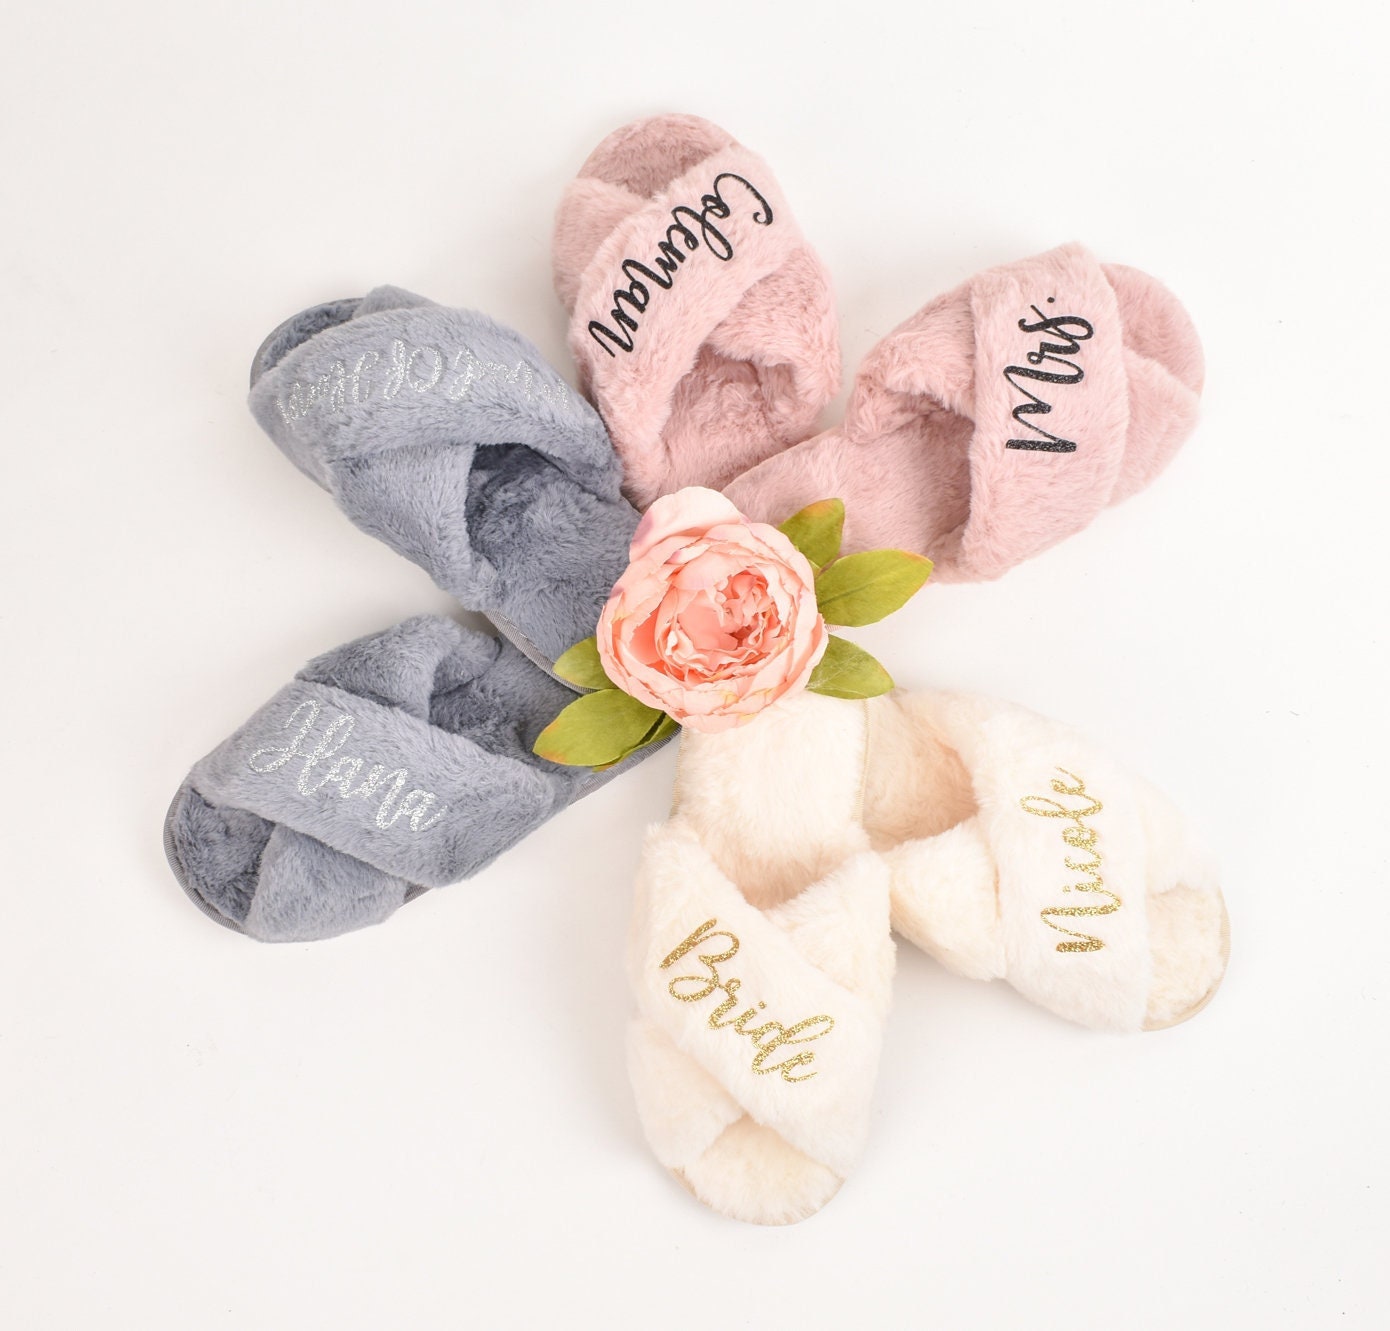 Pink Fluffy Slippers for Women Gifts Gifts Bachelorette Party for Her Birthday Gift Best Friend Gift Fluffy Slippers for Bride M-Sage